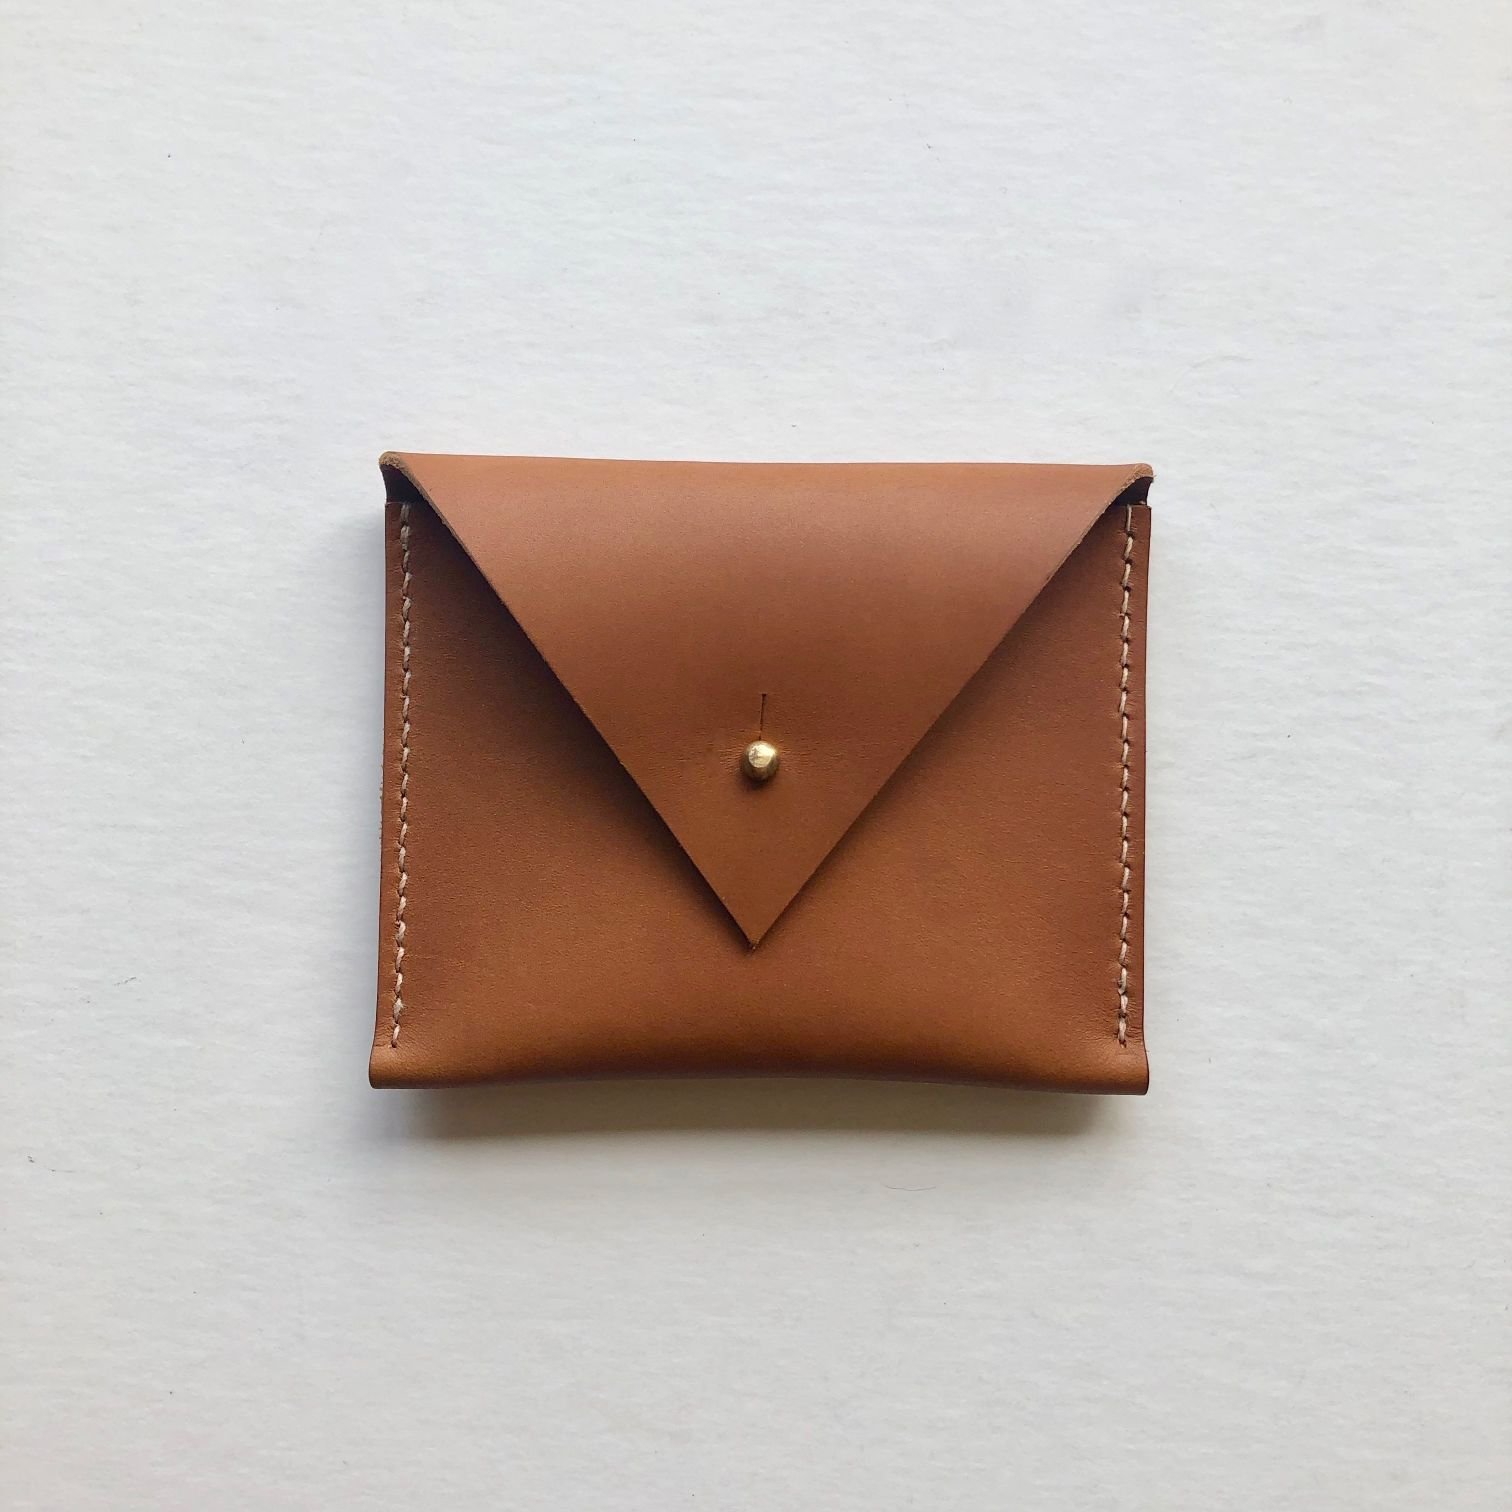 CARV sustainable leather coin purse in tan handmade in the UK